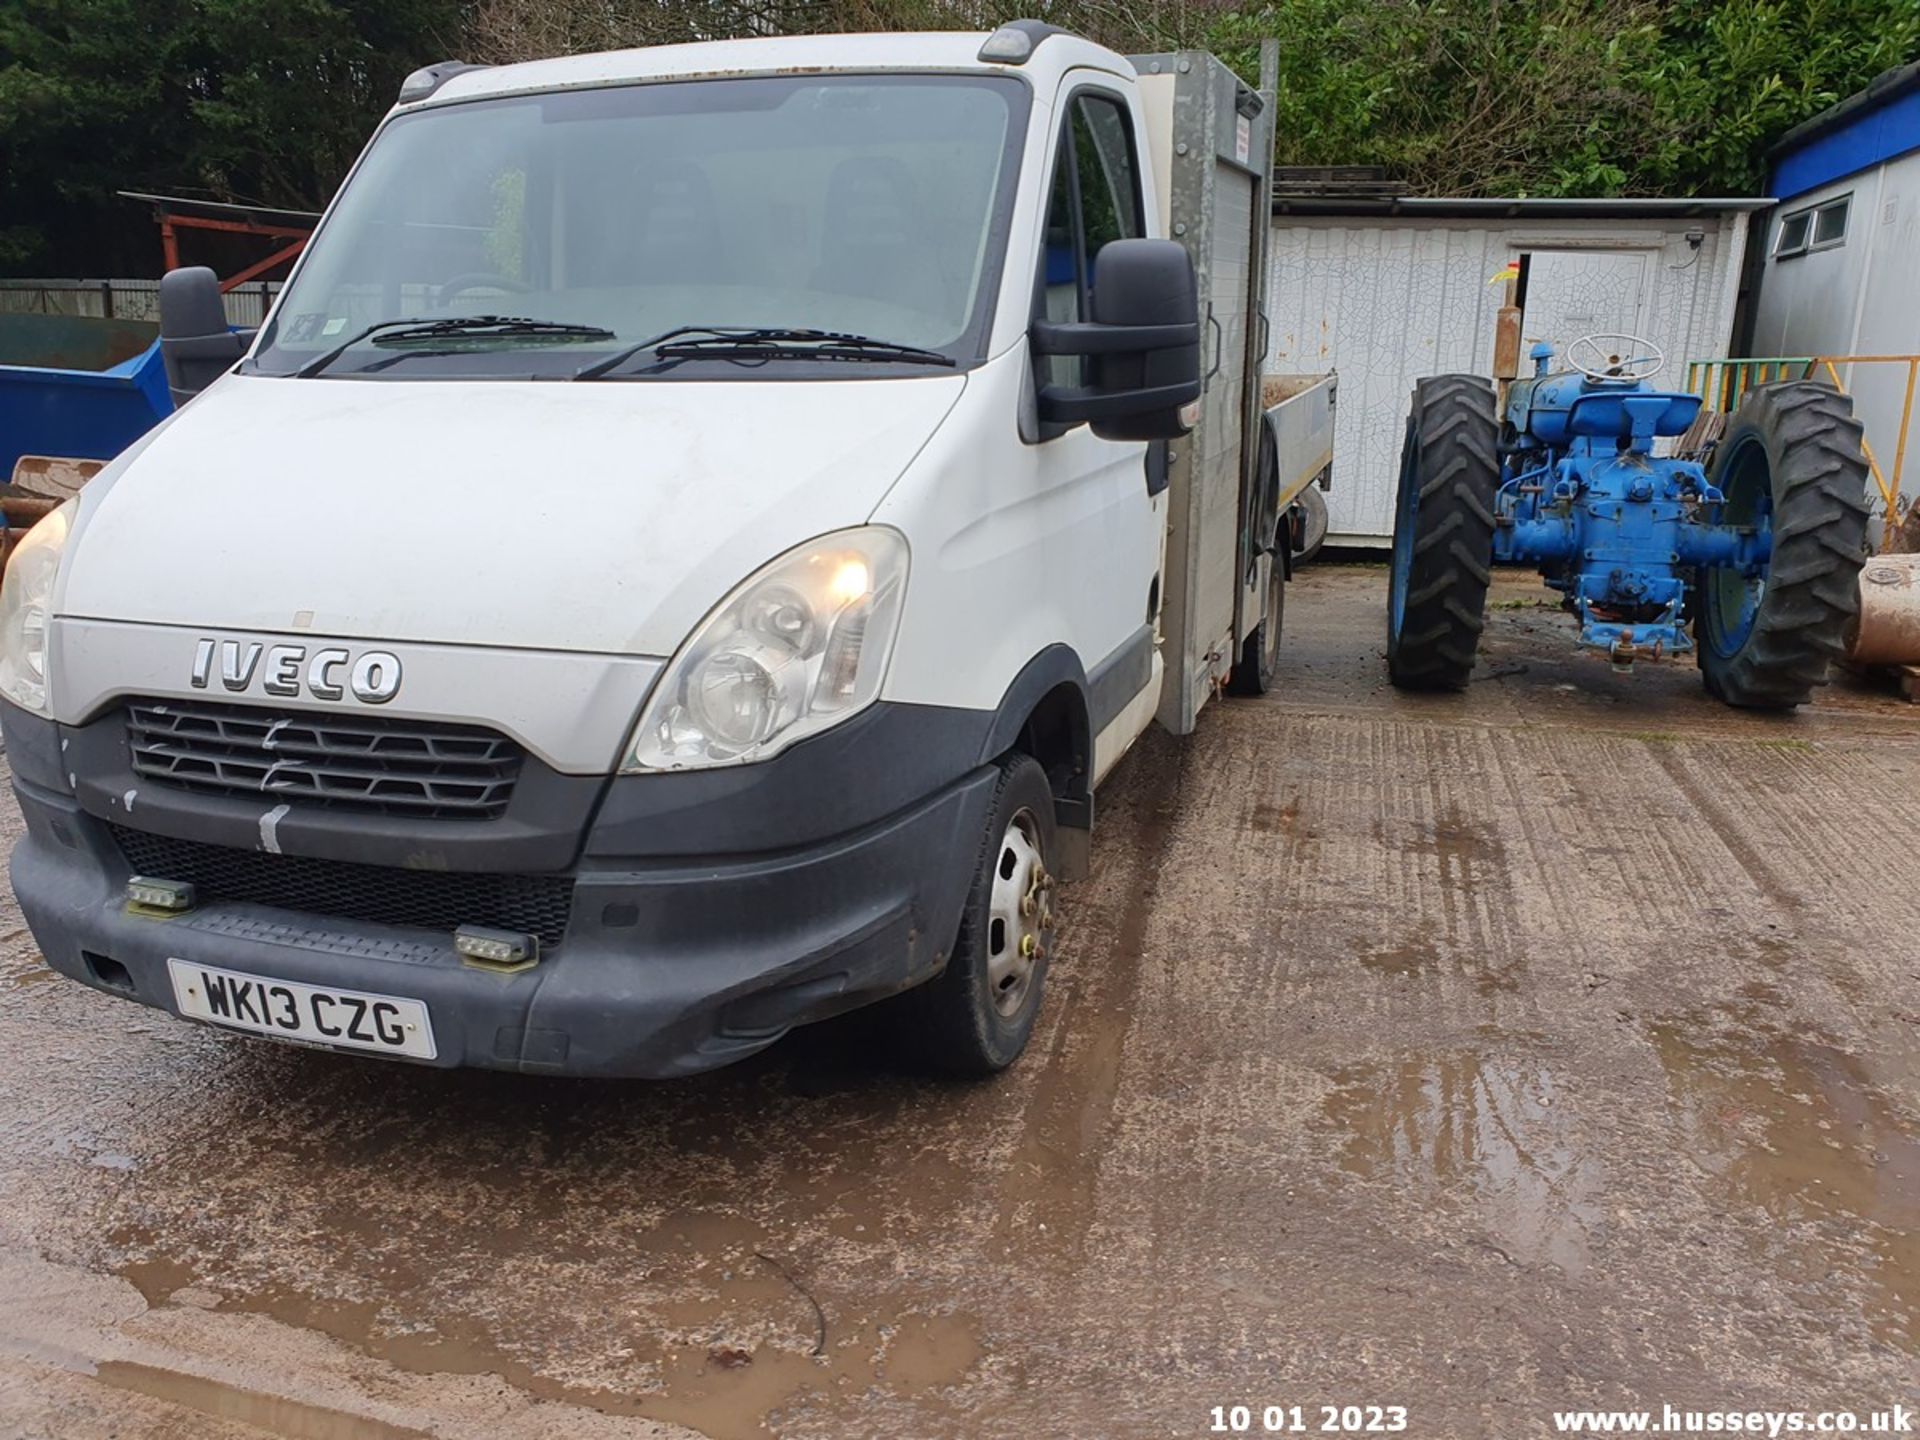 13/13 IVECO DAILY 50C15 - 2998cc 2dr Tipper (White, 100k) - Image 12 of 24